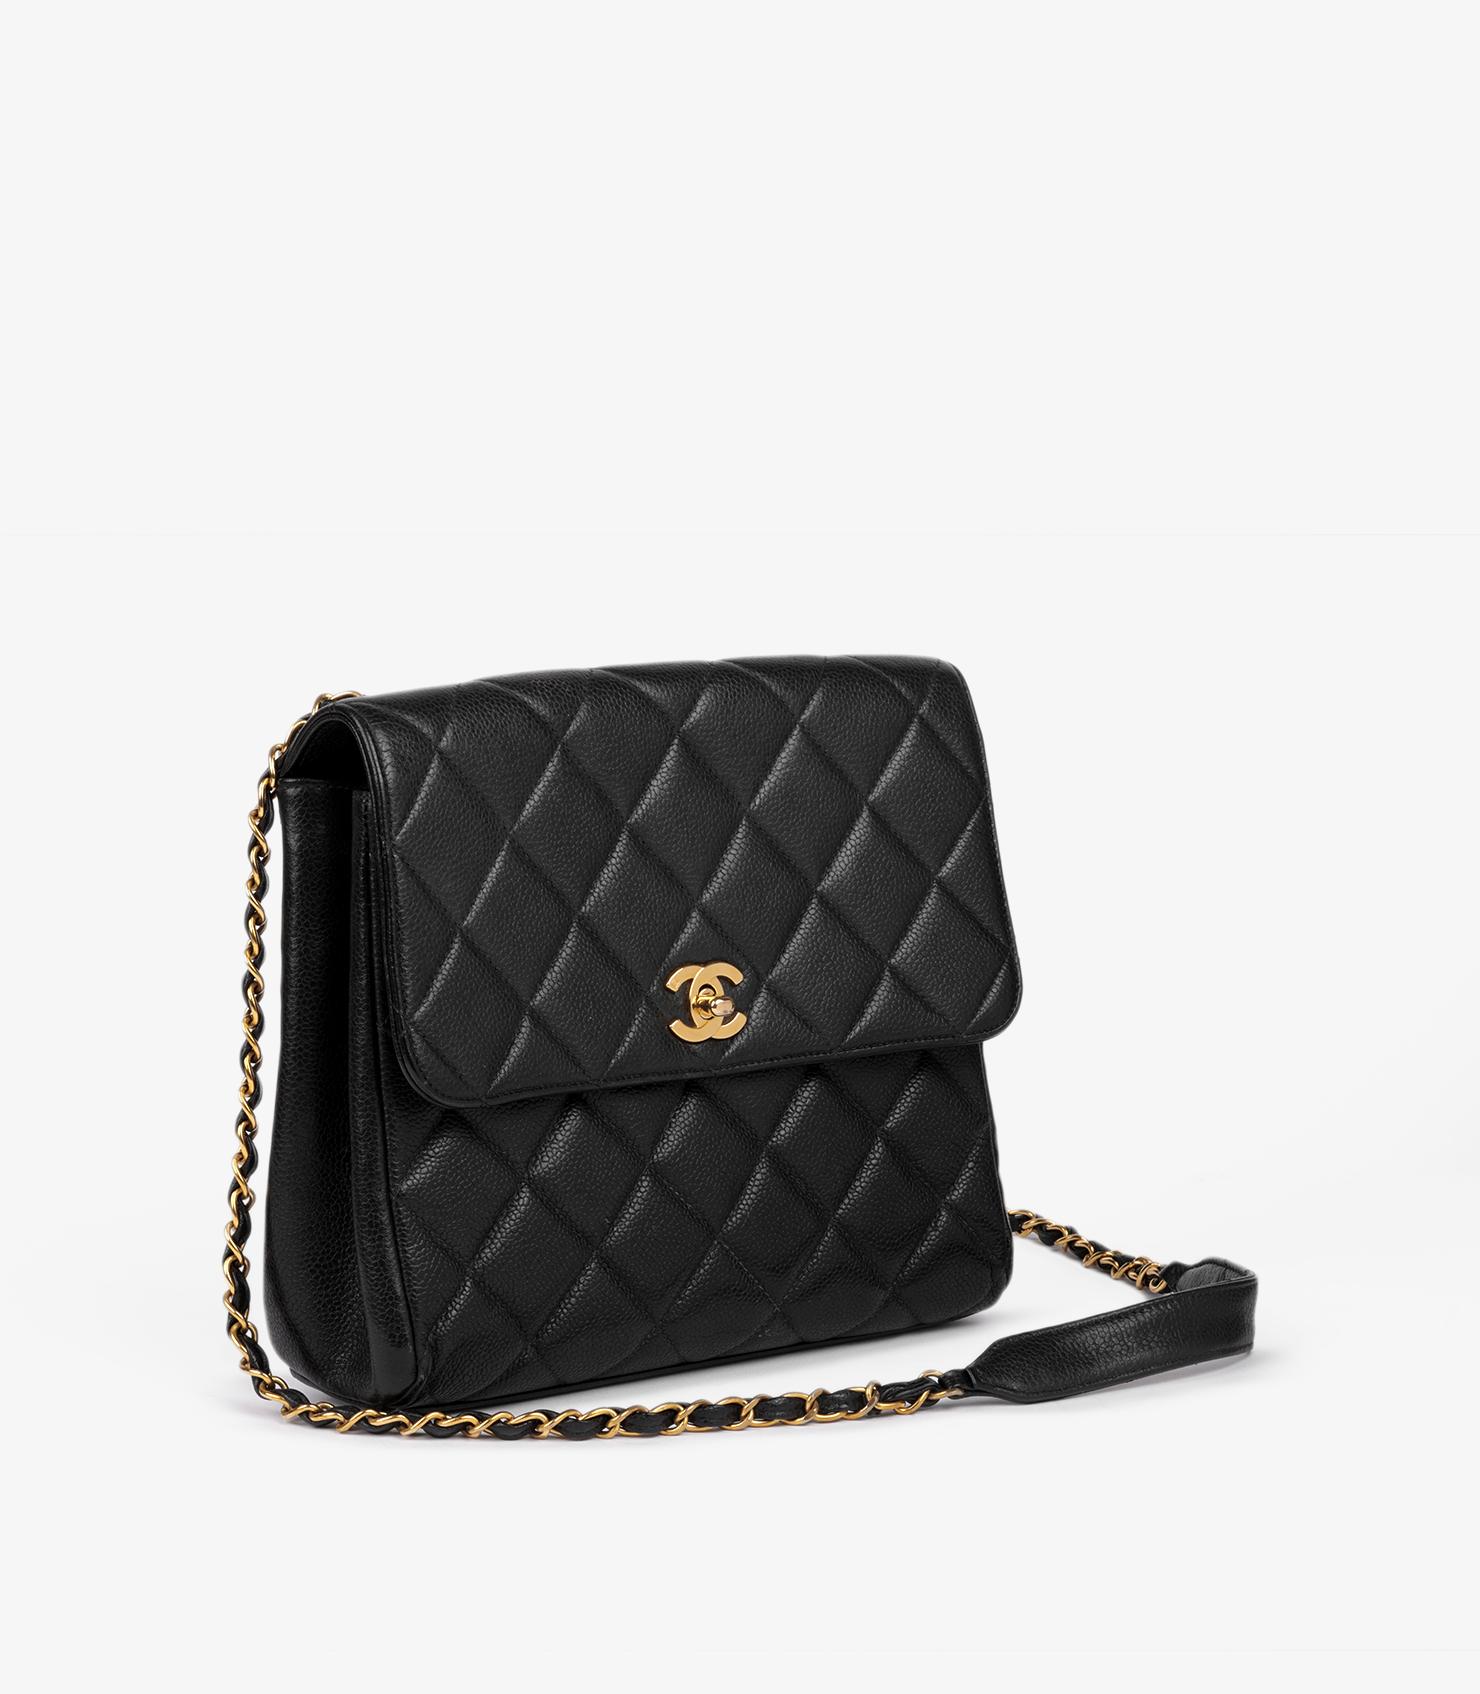 Chanel Black Quilted Caviar Leather Vintage Small Classic Single Flap Bag In Excellent Condition For Sale In Bishop's Stortford, Hertfordshire